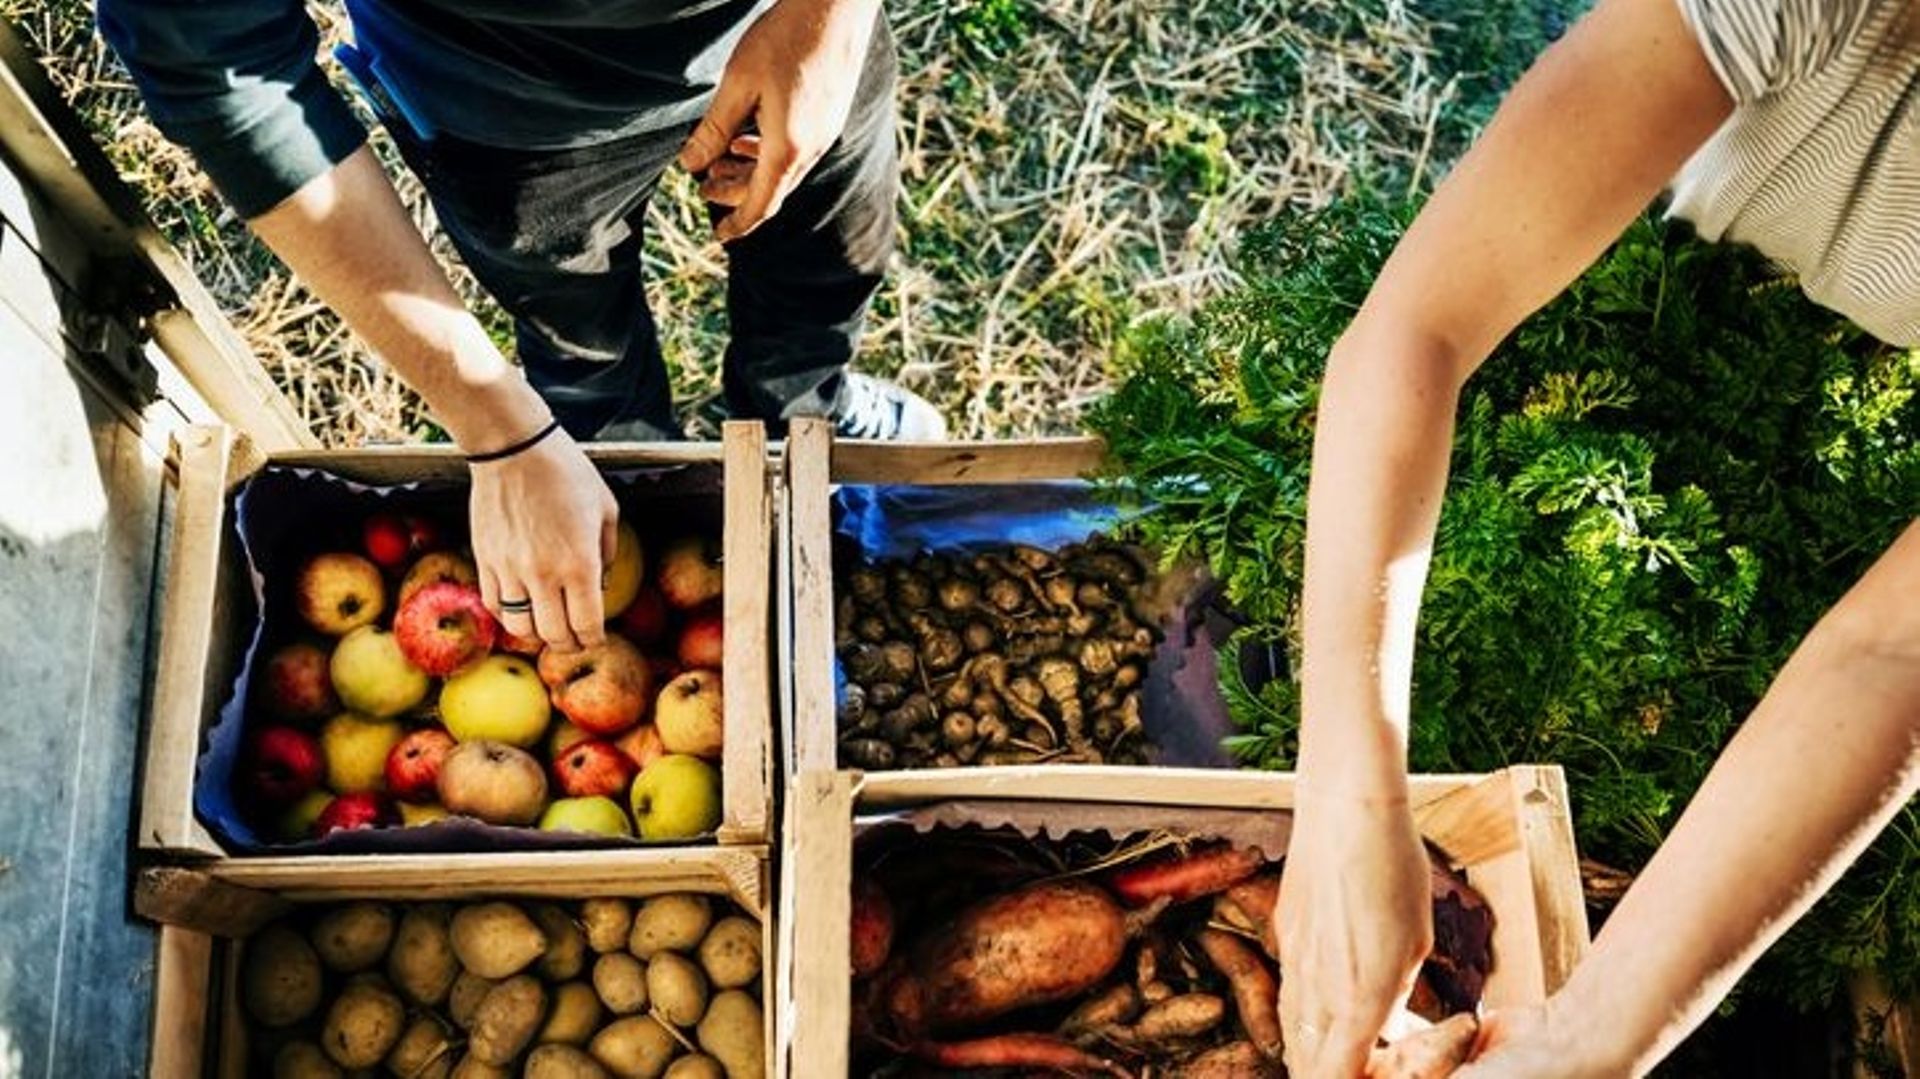 Urban Farmers Organising Crates Of Fruits And Vegetables On Truck